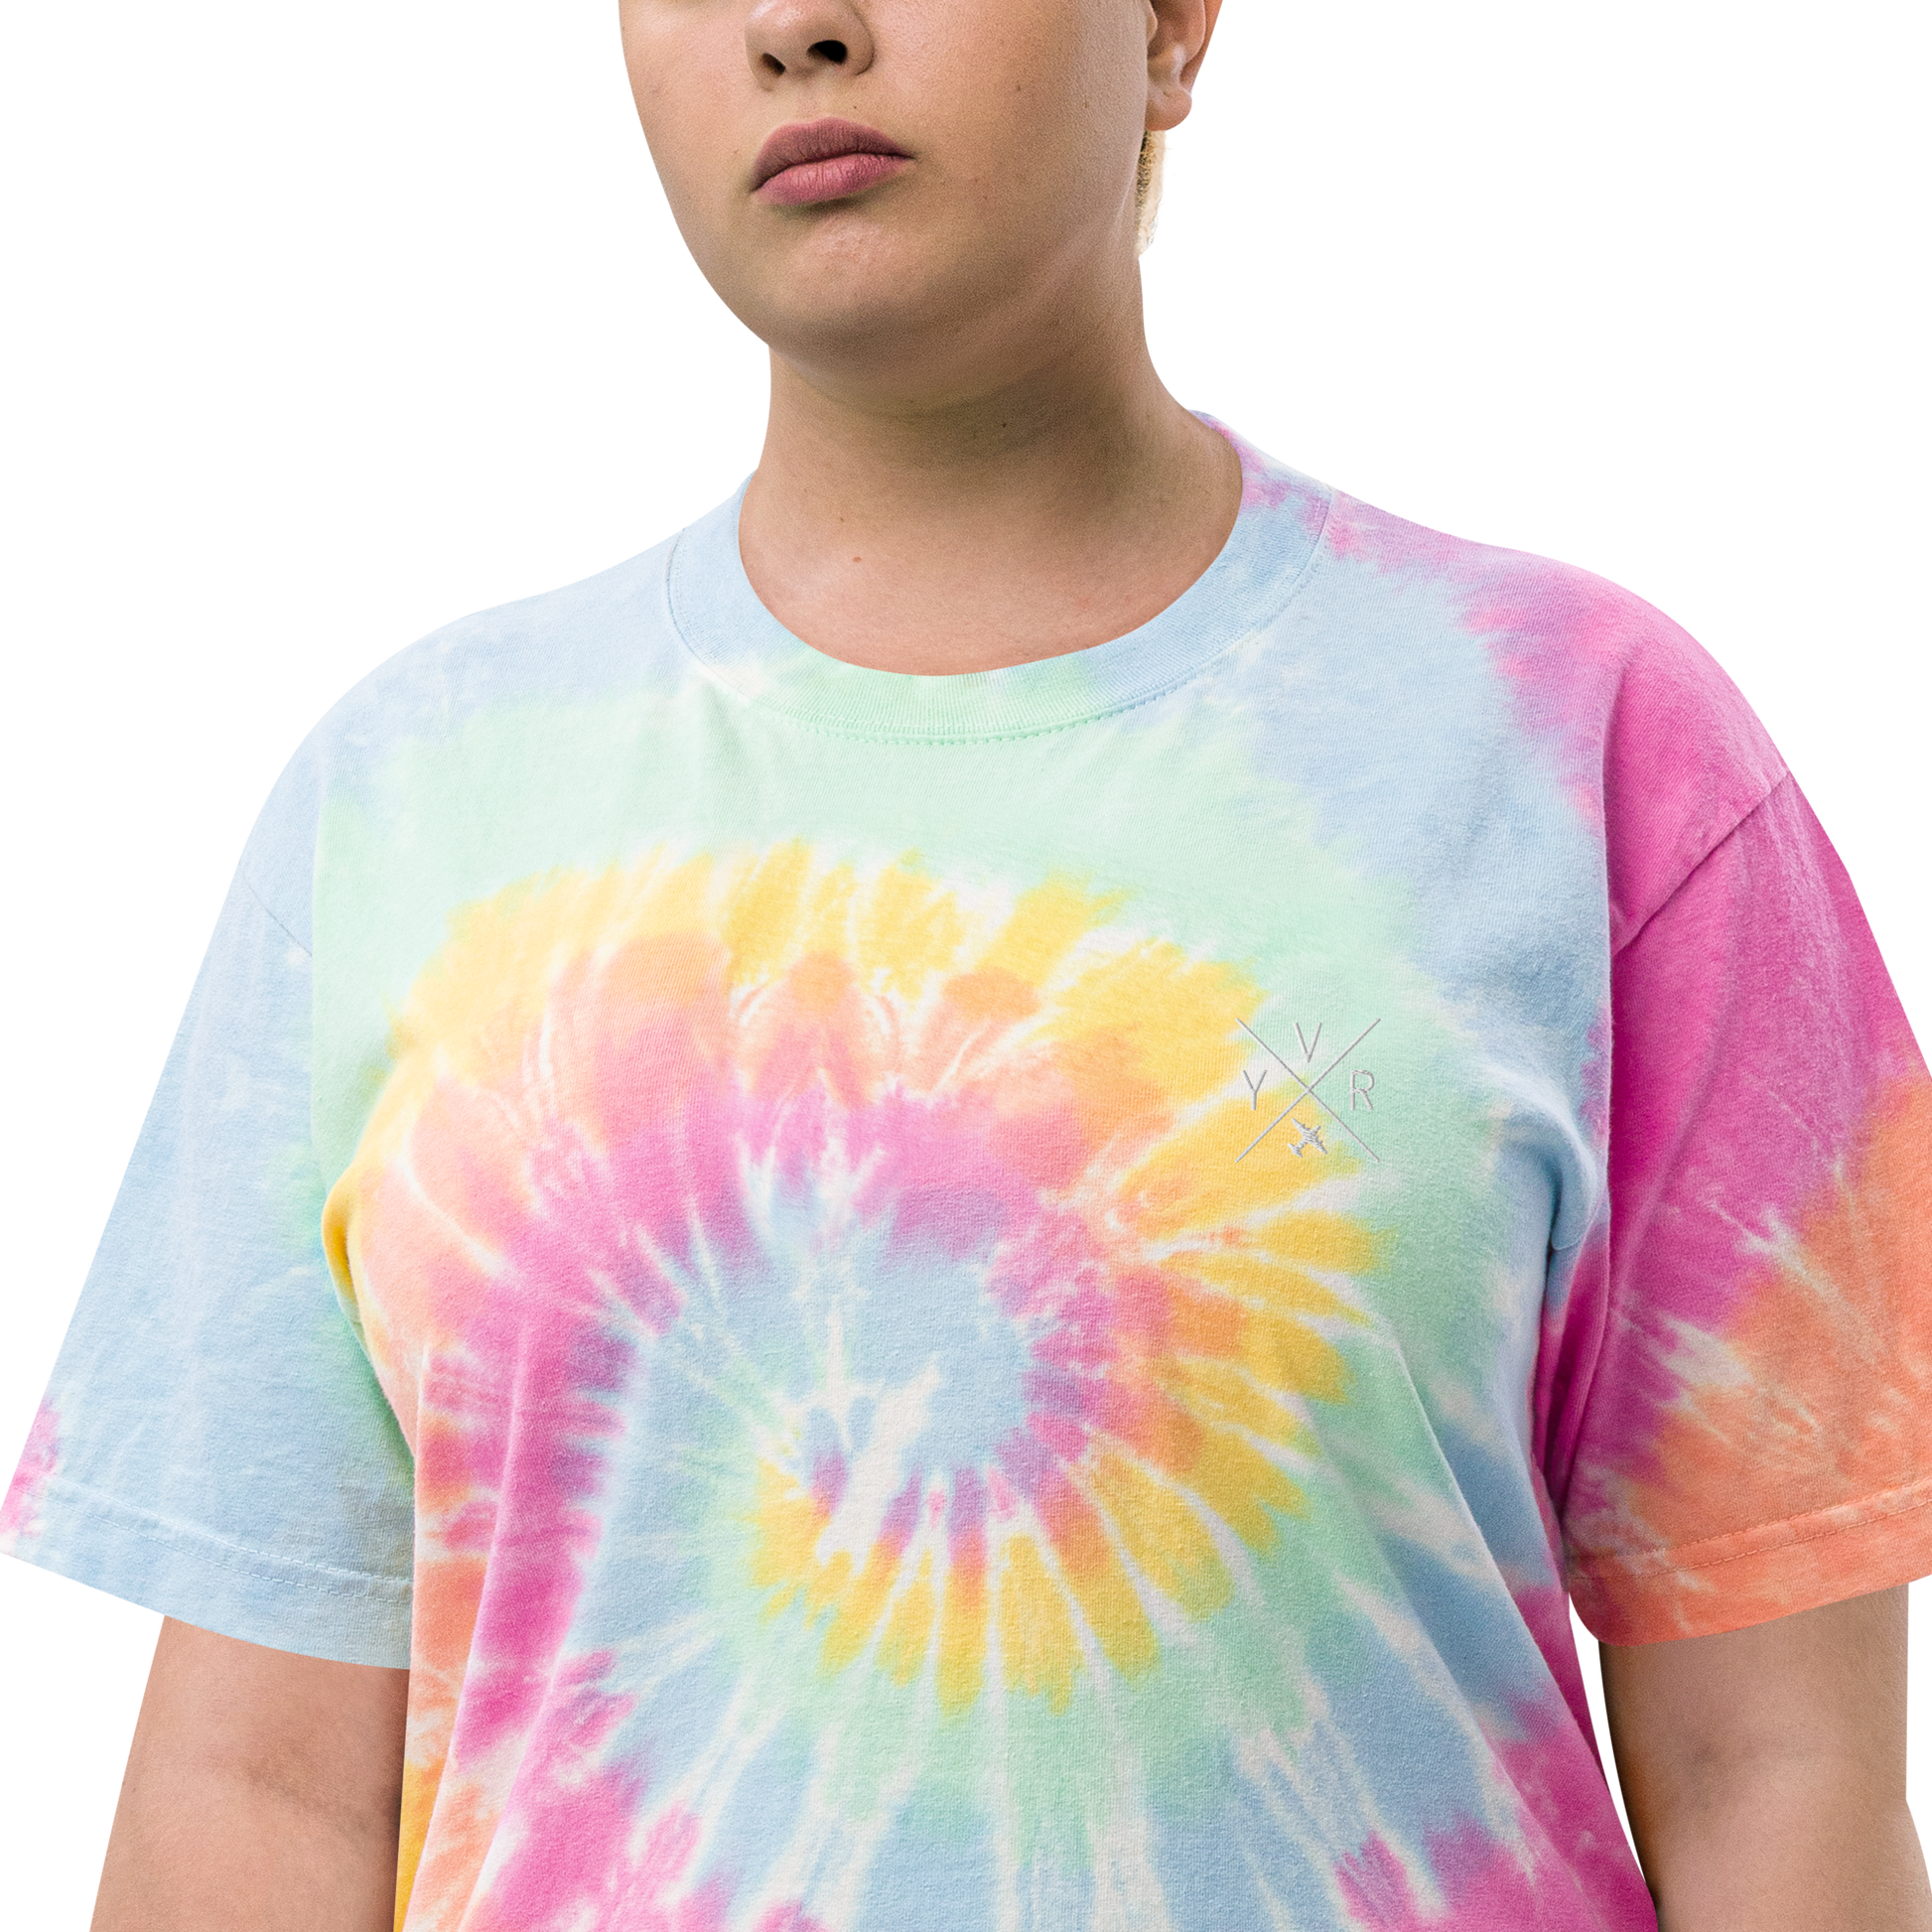 Crossed-X Oversized Tie-Dye T-Shirt • YVR Vancouver • YHM Designs - Image 13